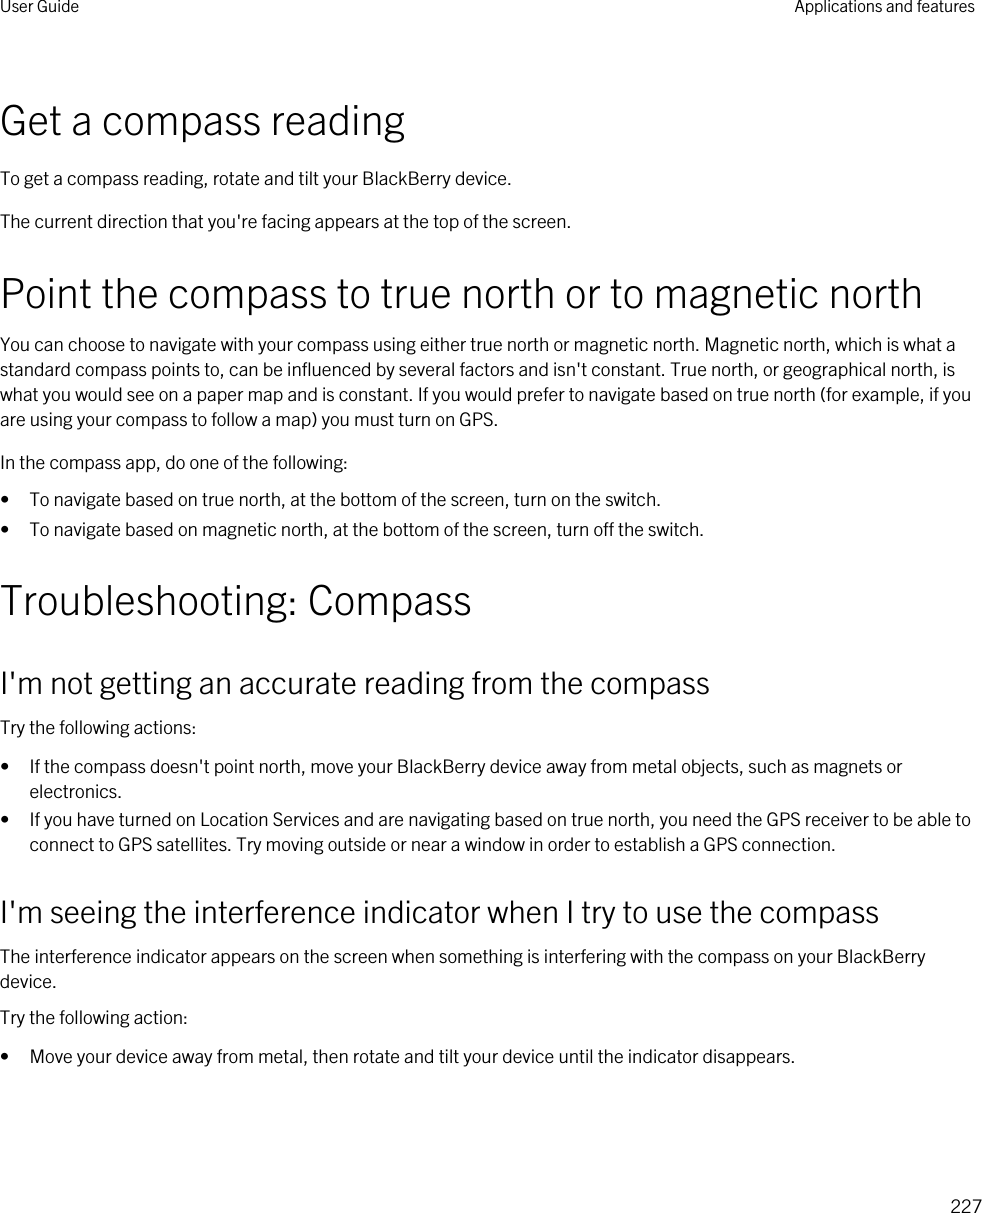 Get a compass readingTo get a compass reading, rotate and tilt your BlackBerry device.The current direction that you&apos;re facing appears at the top of the screen.Point the compass to true north or to magnetic northYou can choose to navigate with your compass using either true north or magnetic north. Magnetic north, which is what a standard compass points to, can be influenced by several factors and isn&apos;t constant. True north, or geographical north, is what you would see on a paper map and is constant. If you would prefer to navigate based on true north (for example, if you are using your compass to follow a map) you must turn on GPS.In the compass app, do one of the following:• To navigate based on true north, at the bottom of the screen, turn on the switch.• To navigate based on magnetic north, at the bottom of the screen, turn off the switch.Troubleshooting: CompassI&apos;m not getting an accurate reading from the compassTry the following actions:• If the compass doesn&apos;t point north, move your BlackBerry device away from metal objects, such as magnets or electronics.• If you have turned on Location Services and are navigating based on true north, you need the GPS receiver to be able to connect to GPS satellites. Try moving outside or near a window in order to establish a GPS connection.I&apos;m seeing the interference indicator when I try to use the compassThe interference indicator appears on the screen when something is interfering with the compass on your BlackBerry device.Try the following action:• Move your device away from metal, then rotate and tilt your device until the indicator disappears.User Guide Applications and features227